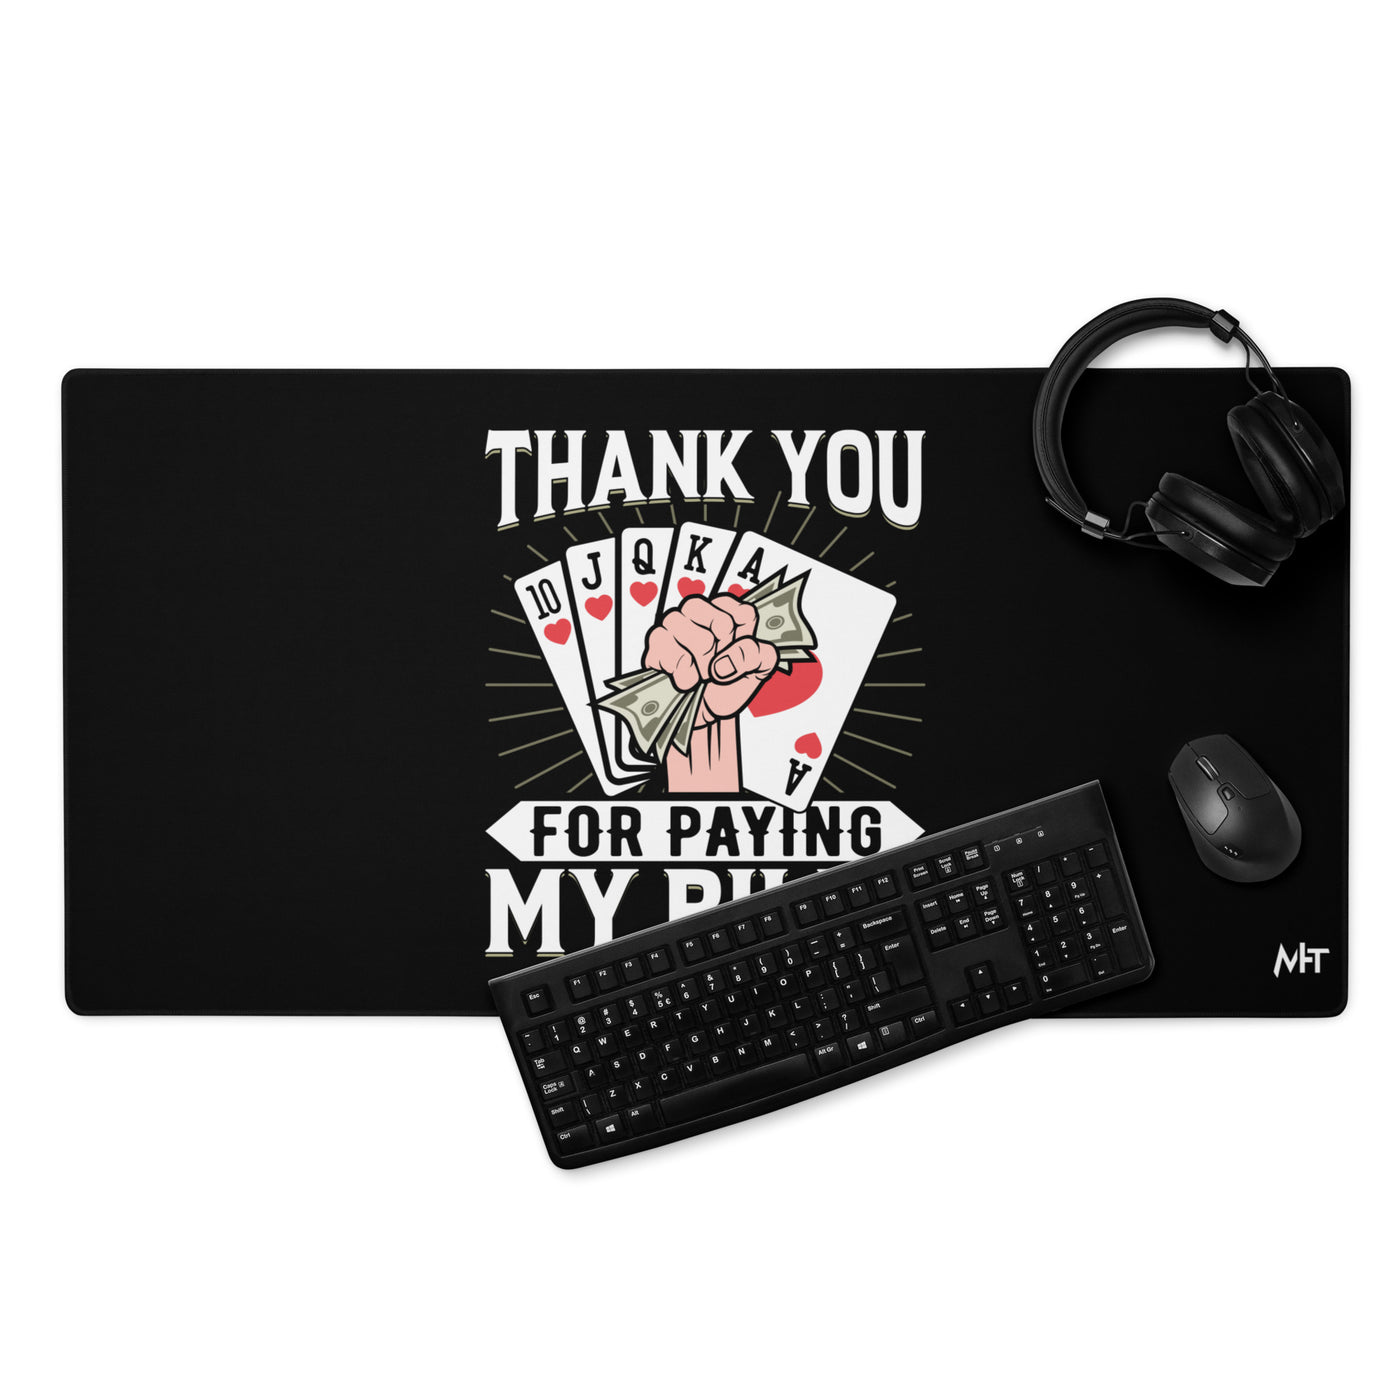 Thank you for Paying my bills - Desk Mat